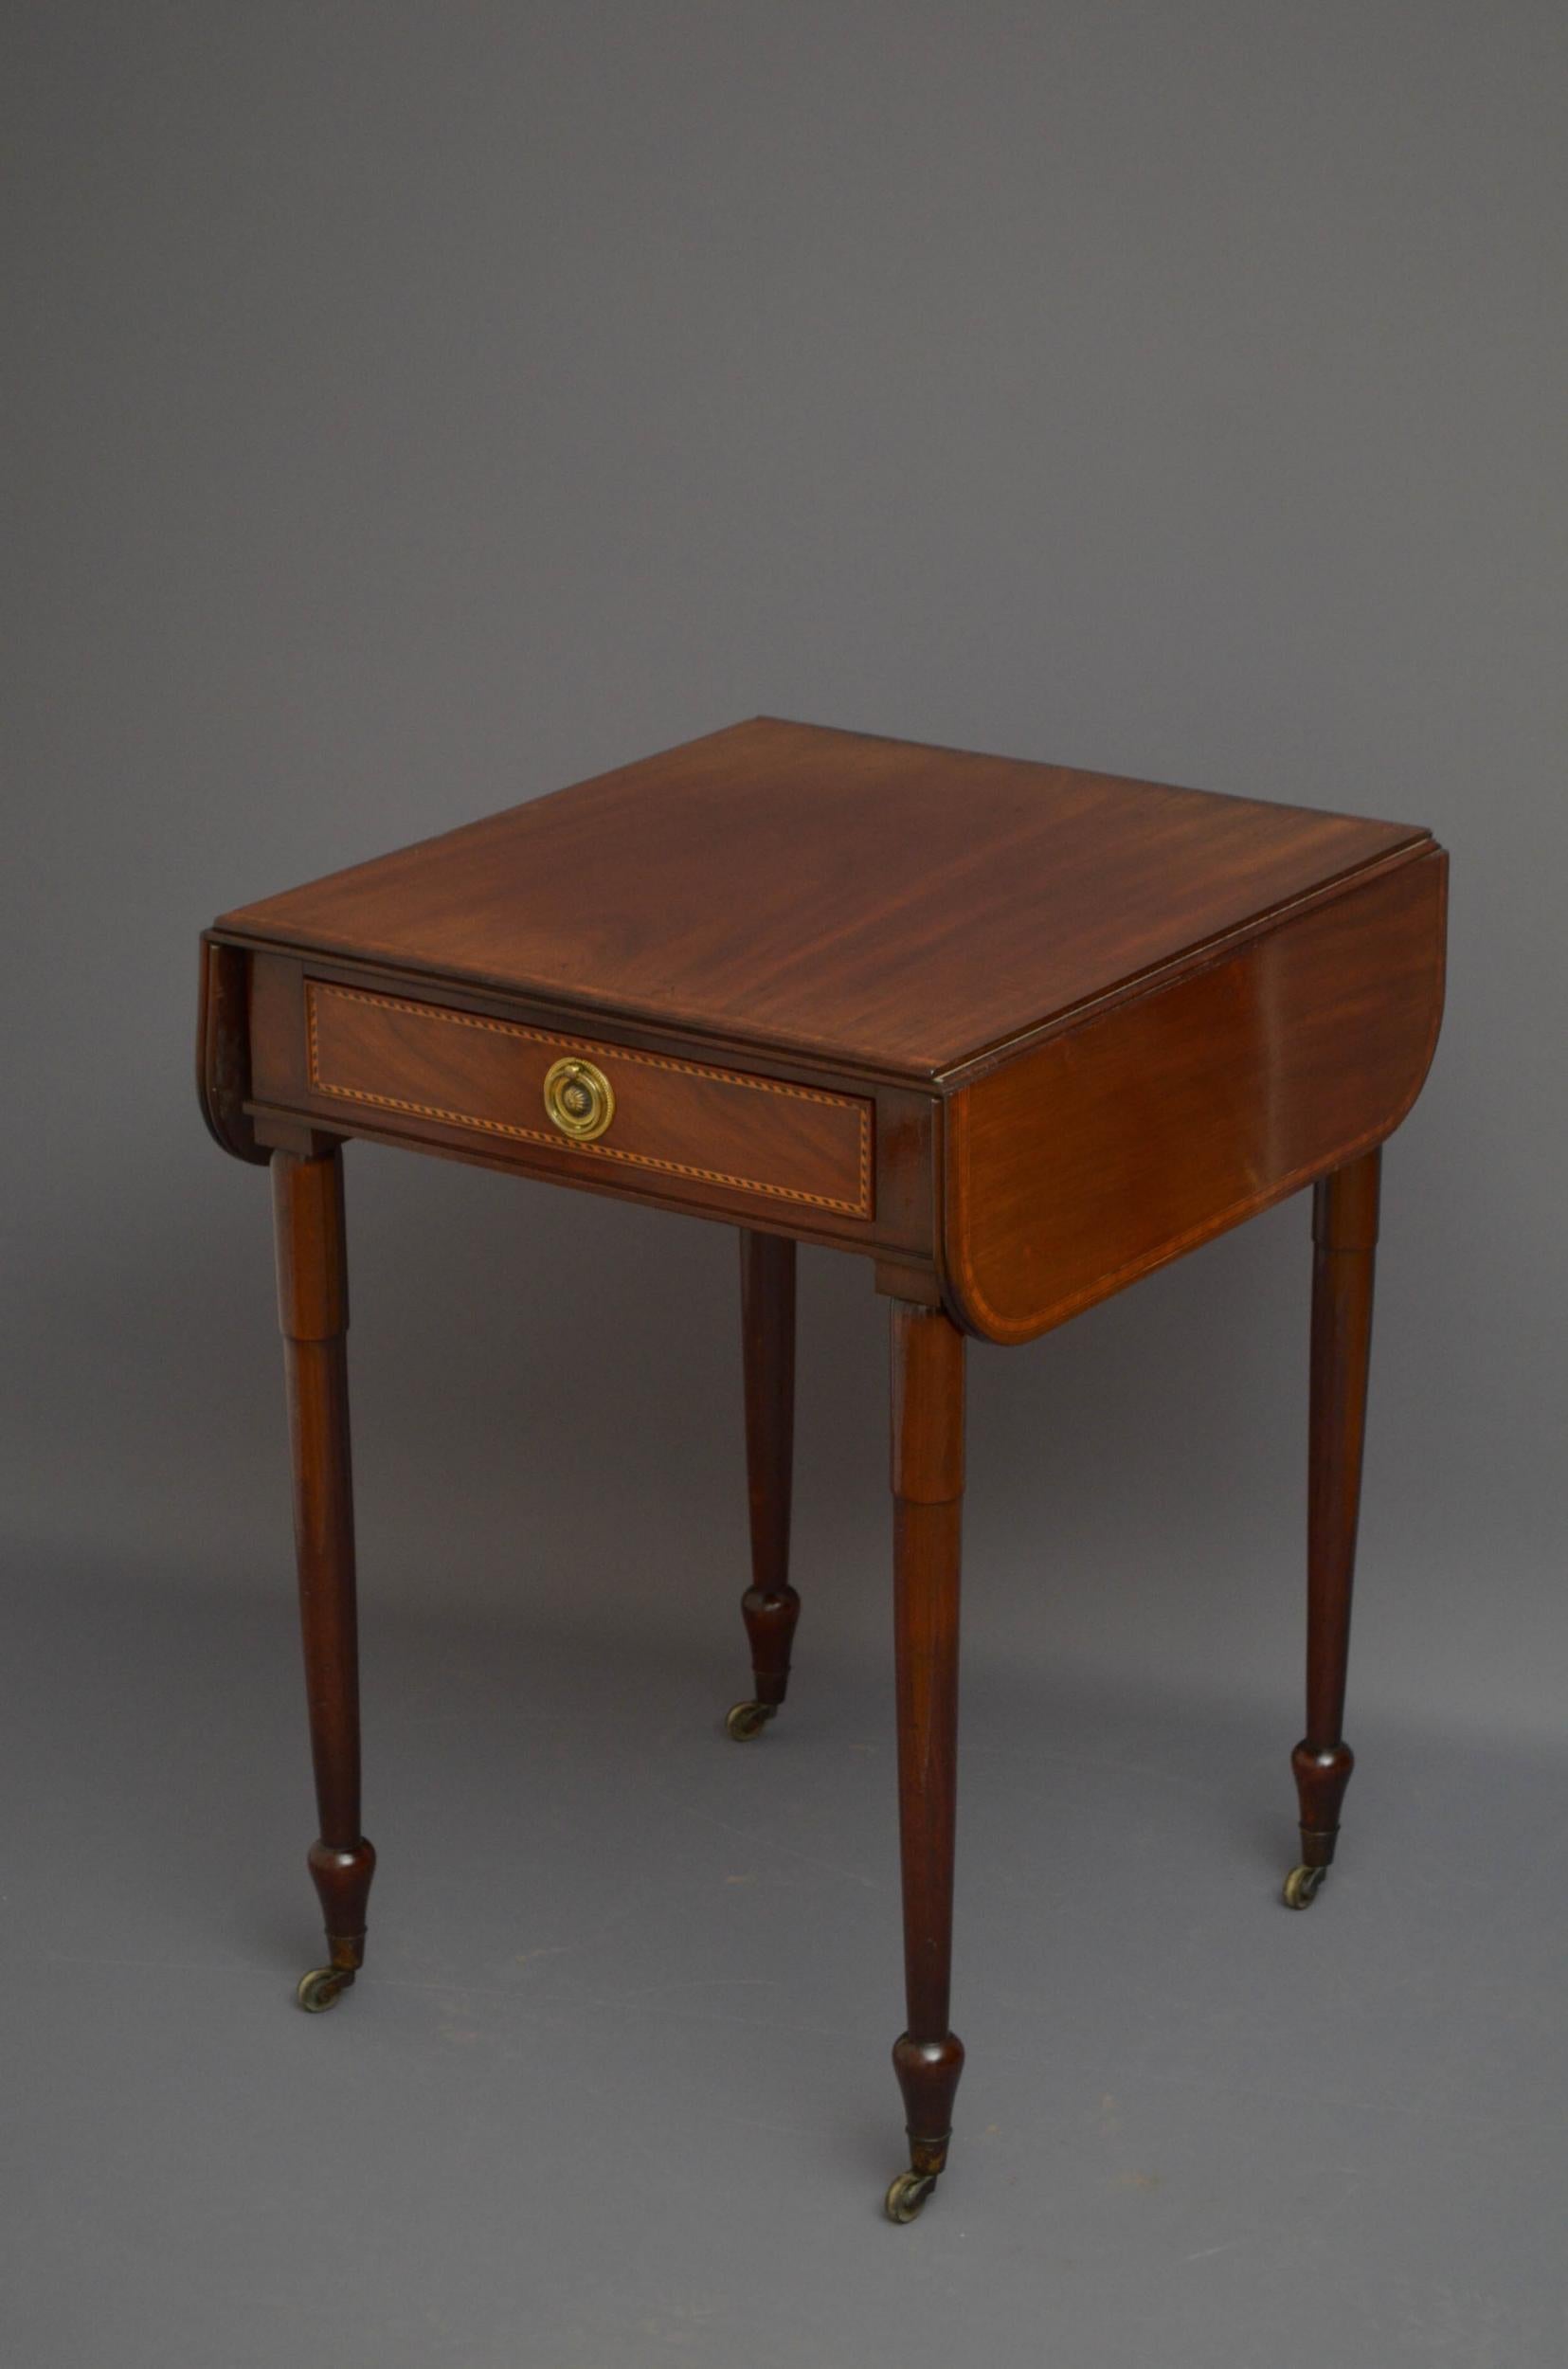 Sn5039 fine quality George IV mahogany and inlaid Pembroke table, having a satinwood crossbanded drop leaf top above a satinwood inlaid drawer fitted with brass handle, standing on turned, slender legs terminating in original brass castors. This